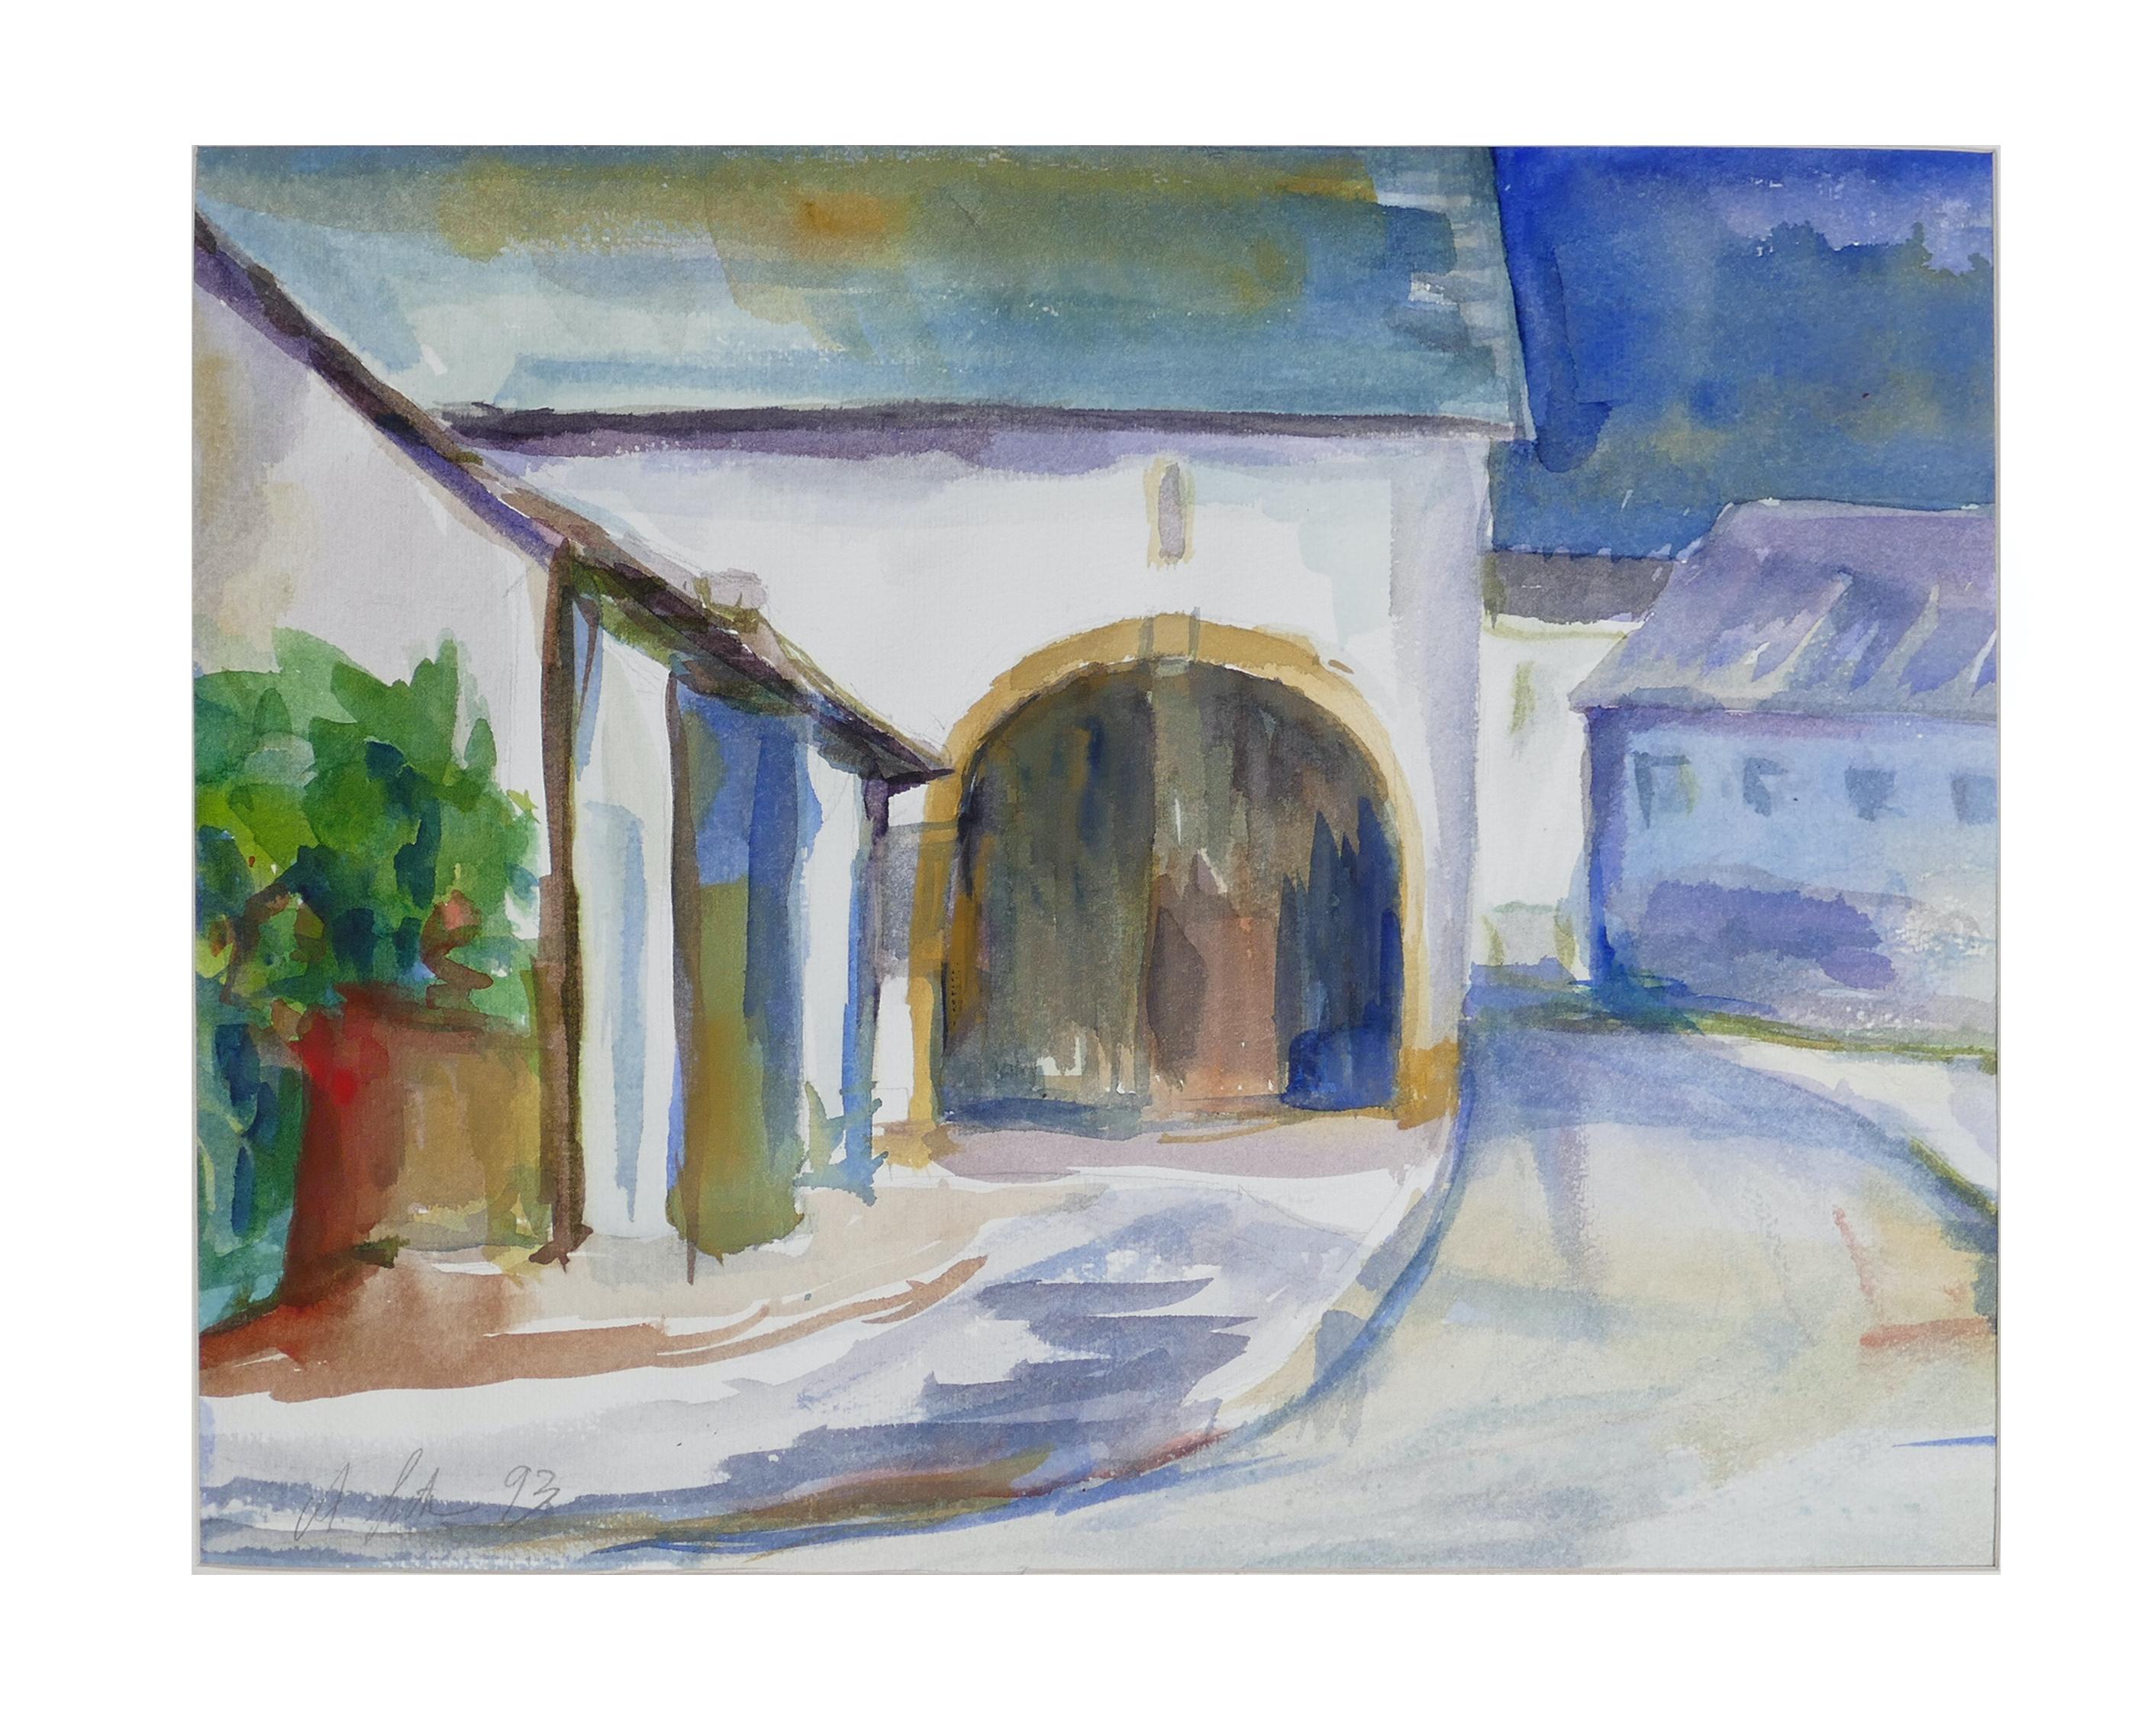 Arc and Houses is an original watercolor on paper, realized in 1993 by Armin Guther.

The artwork is hand-signed and dated in charcoal pencil on the lower-left corner. 

In excellent condition. Including Passepartout (cm 50x 60).

This beautiful